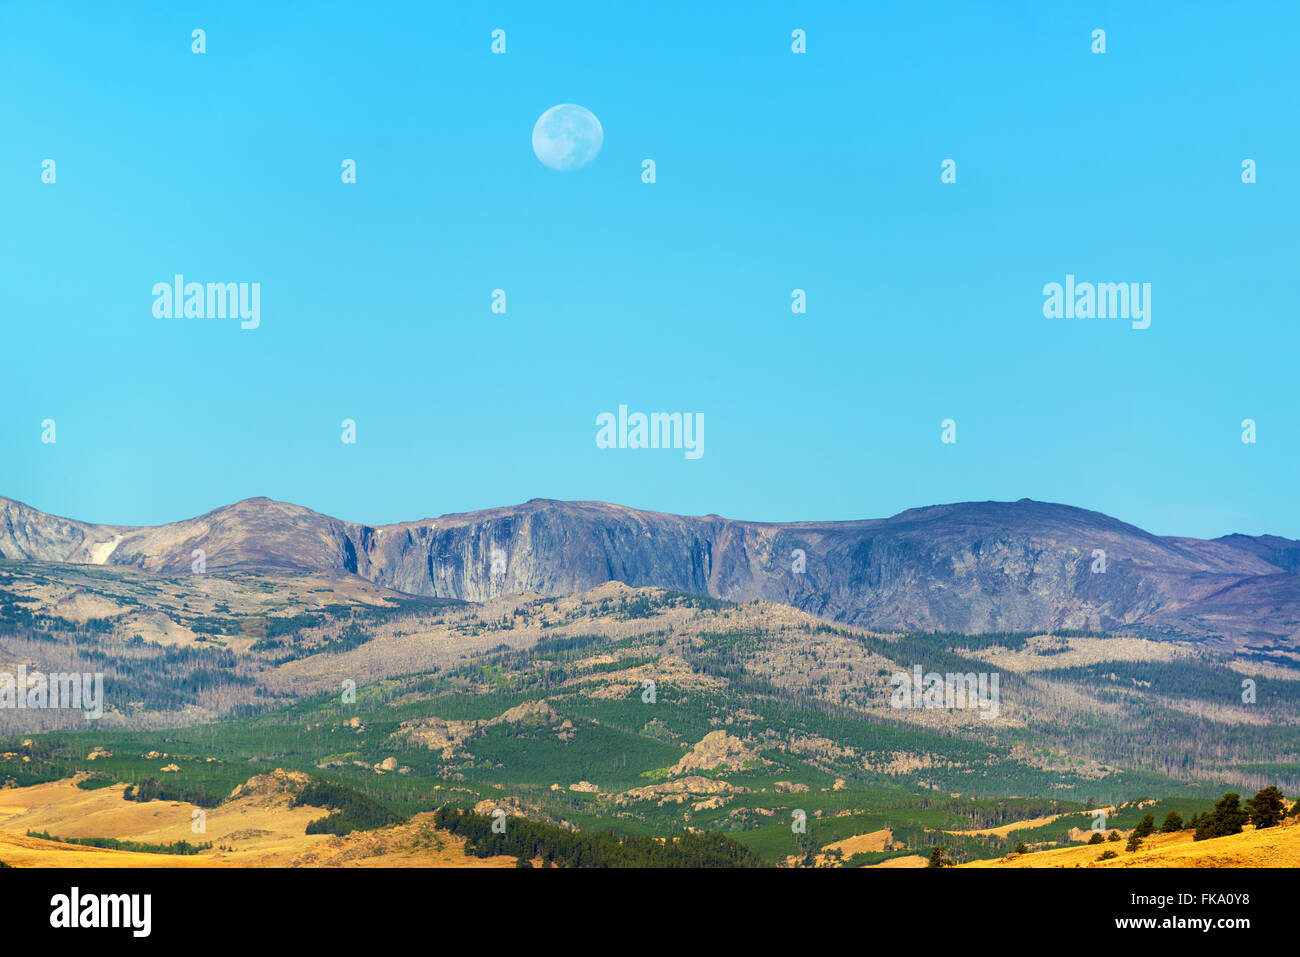 Early morning view of the moon over the Bighorn mountains near Buffalo, Wyoming Stock Photo